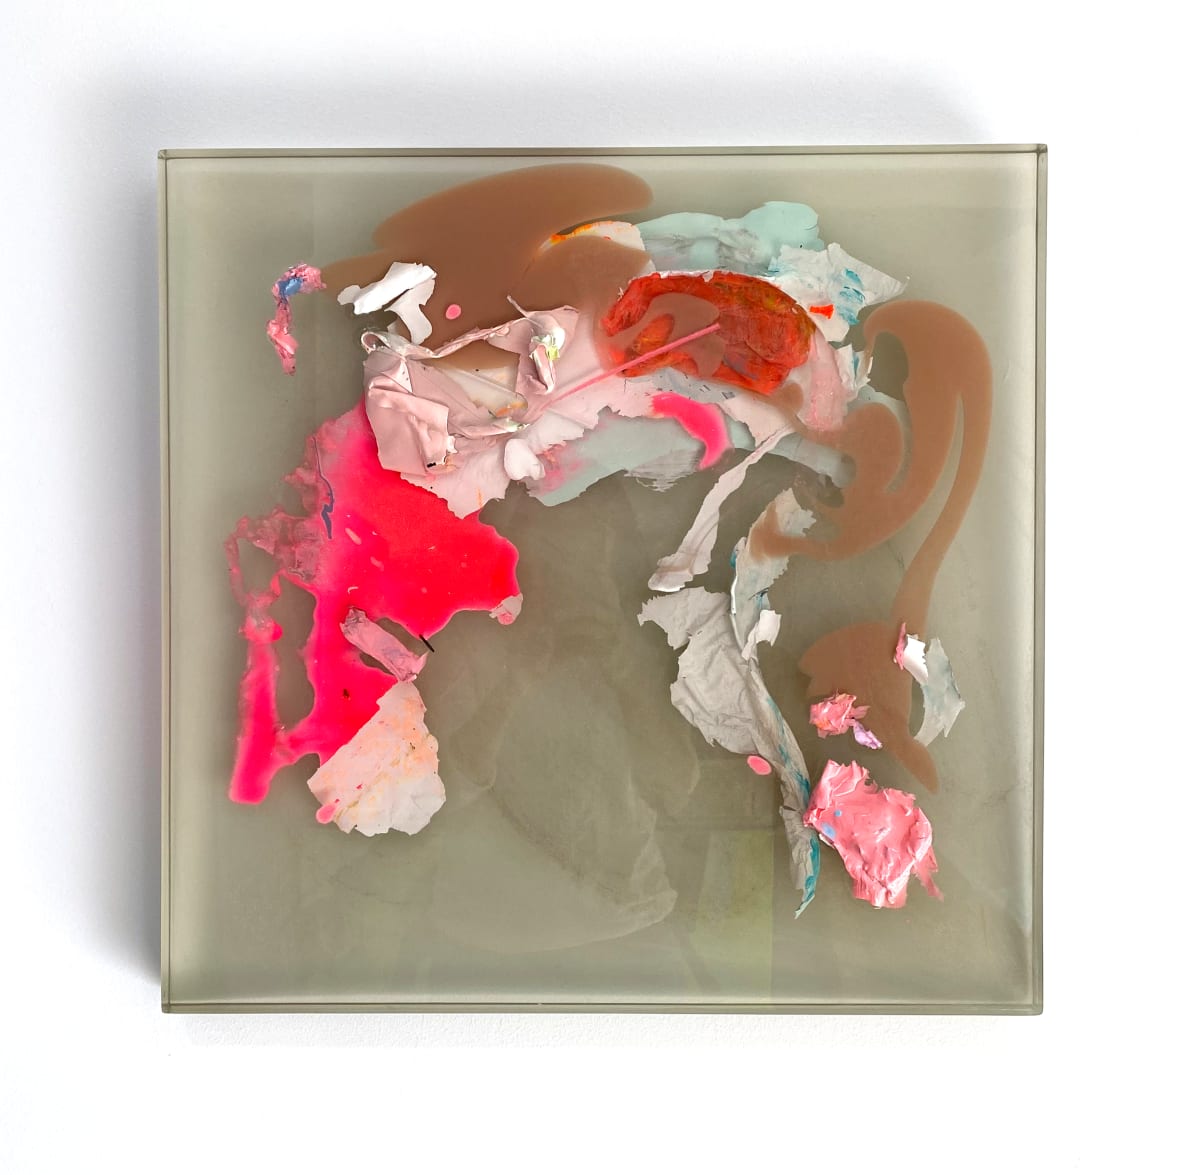 Mon Amour, I Found A Detour by Calina Hiriza  Image: "Mon Amour, I Found A Detour" Acrylic paint skin in resin